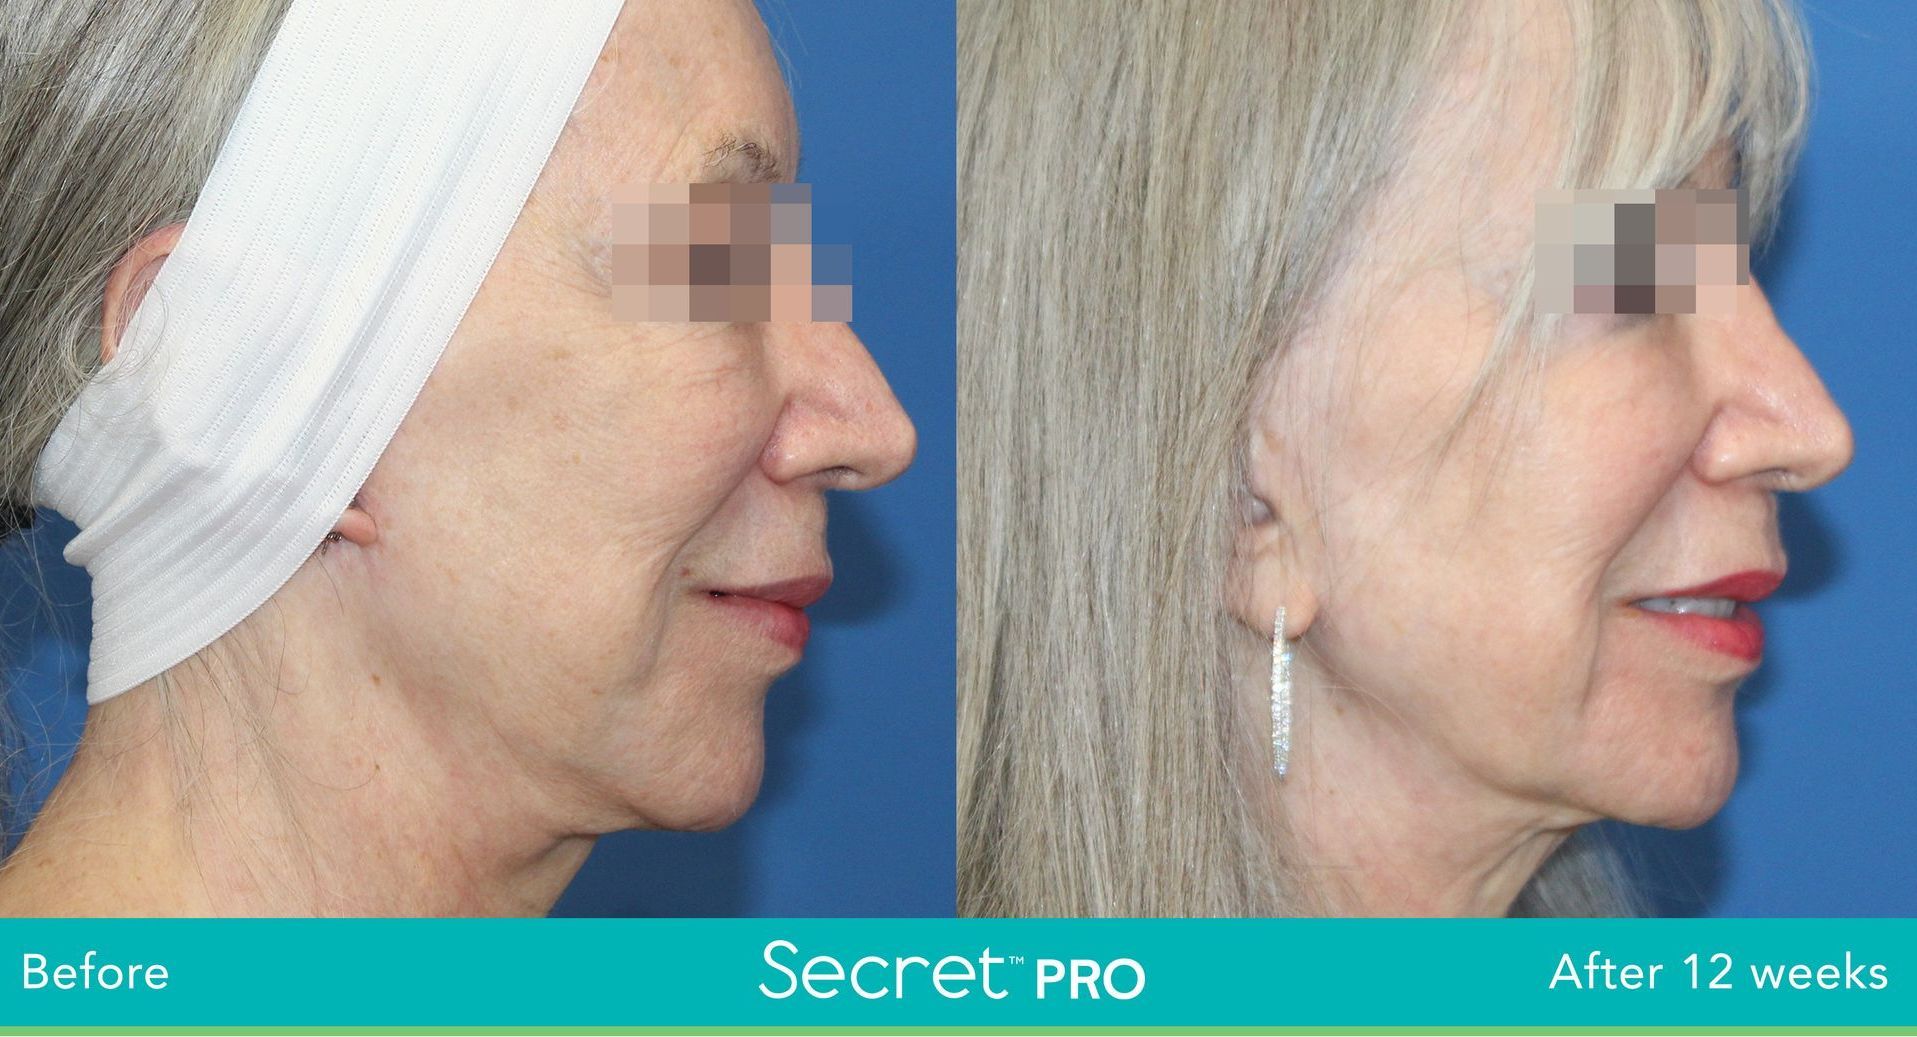 Secret pro, anti aging treatment, microneedling before and after